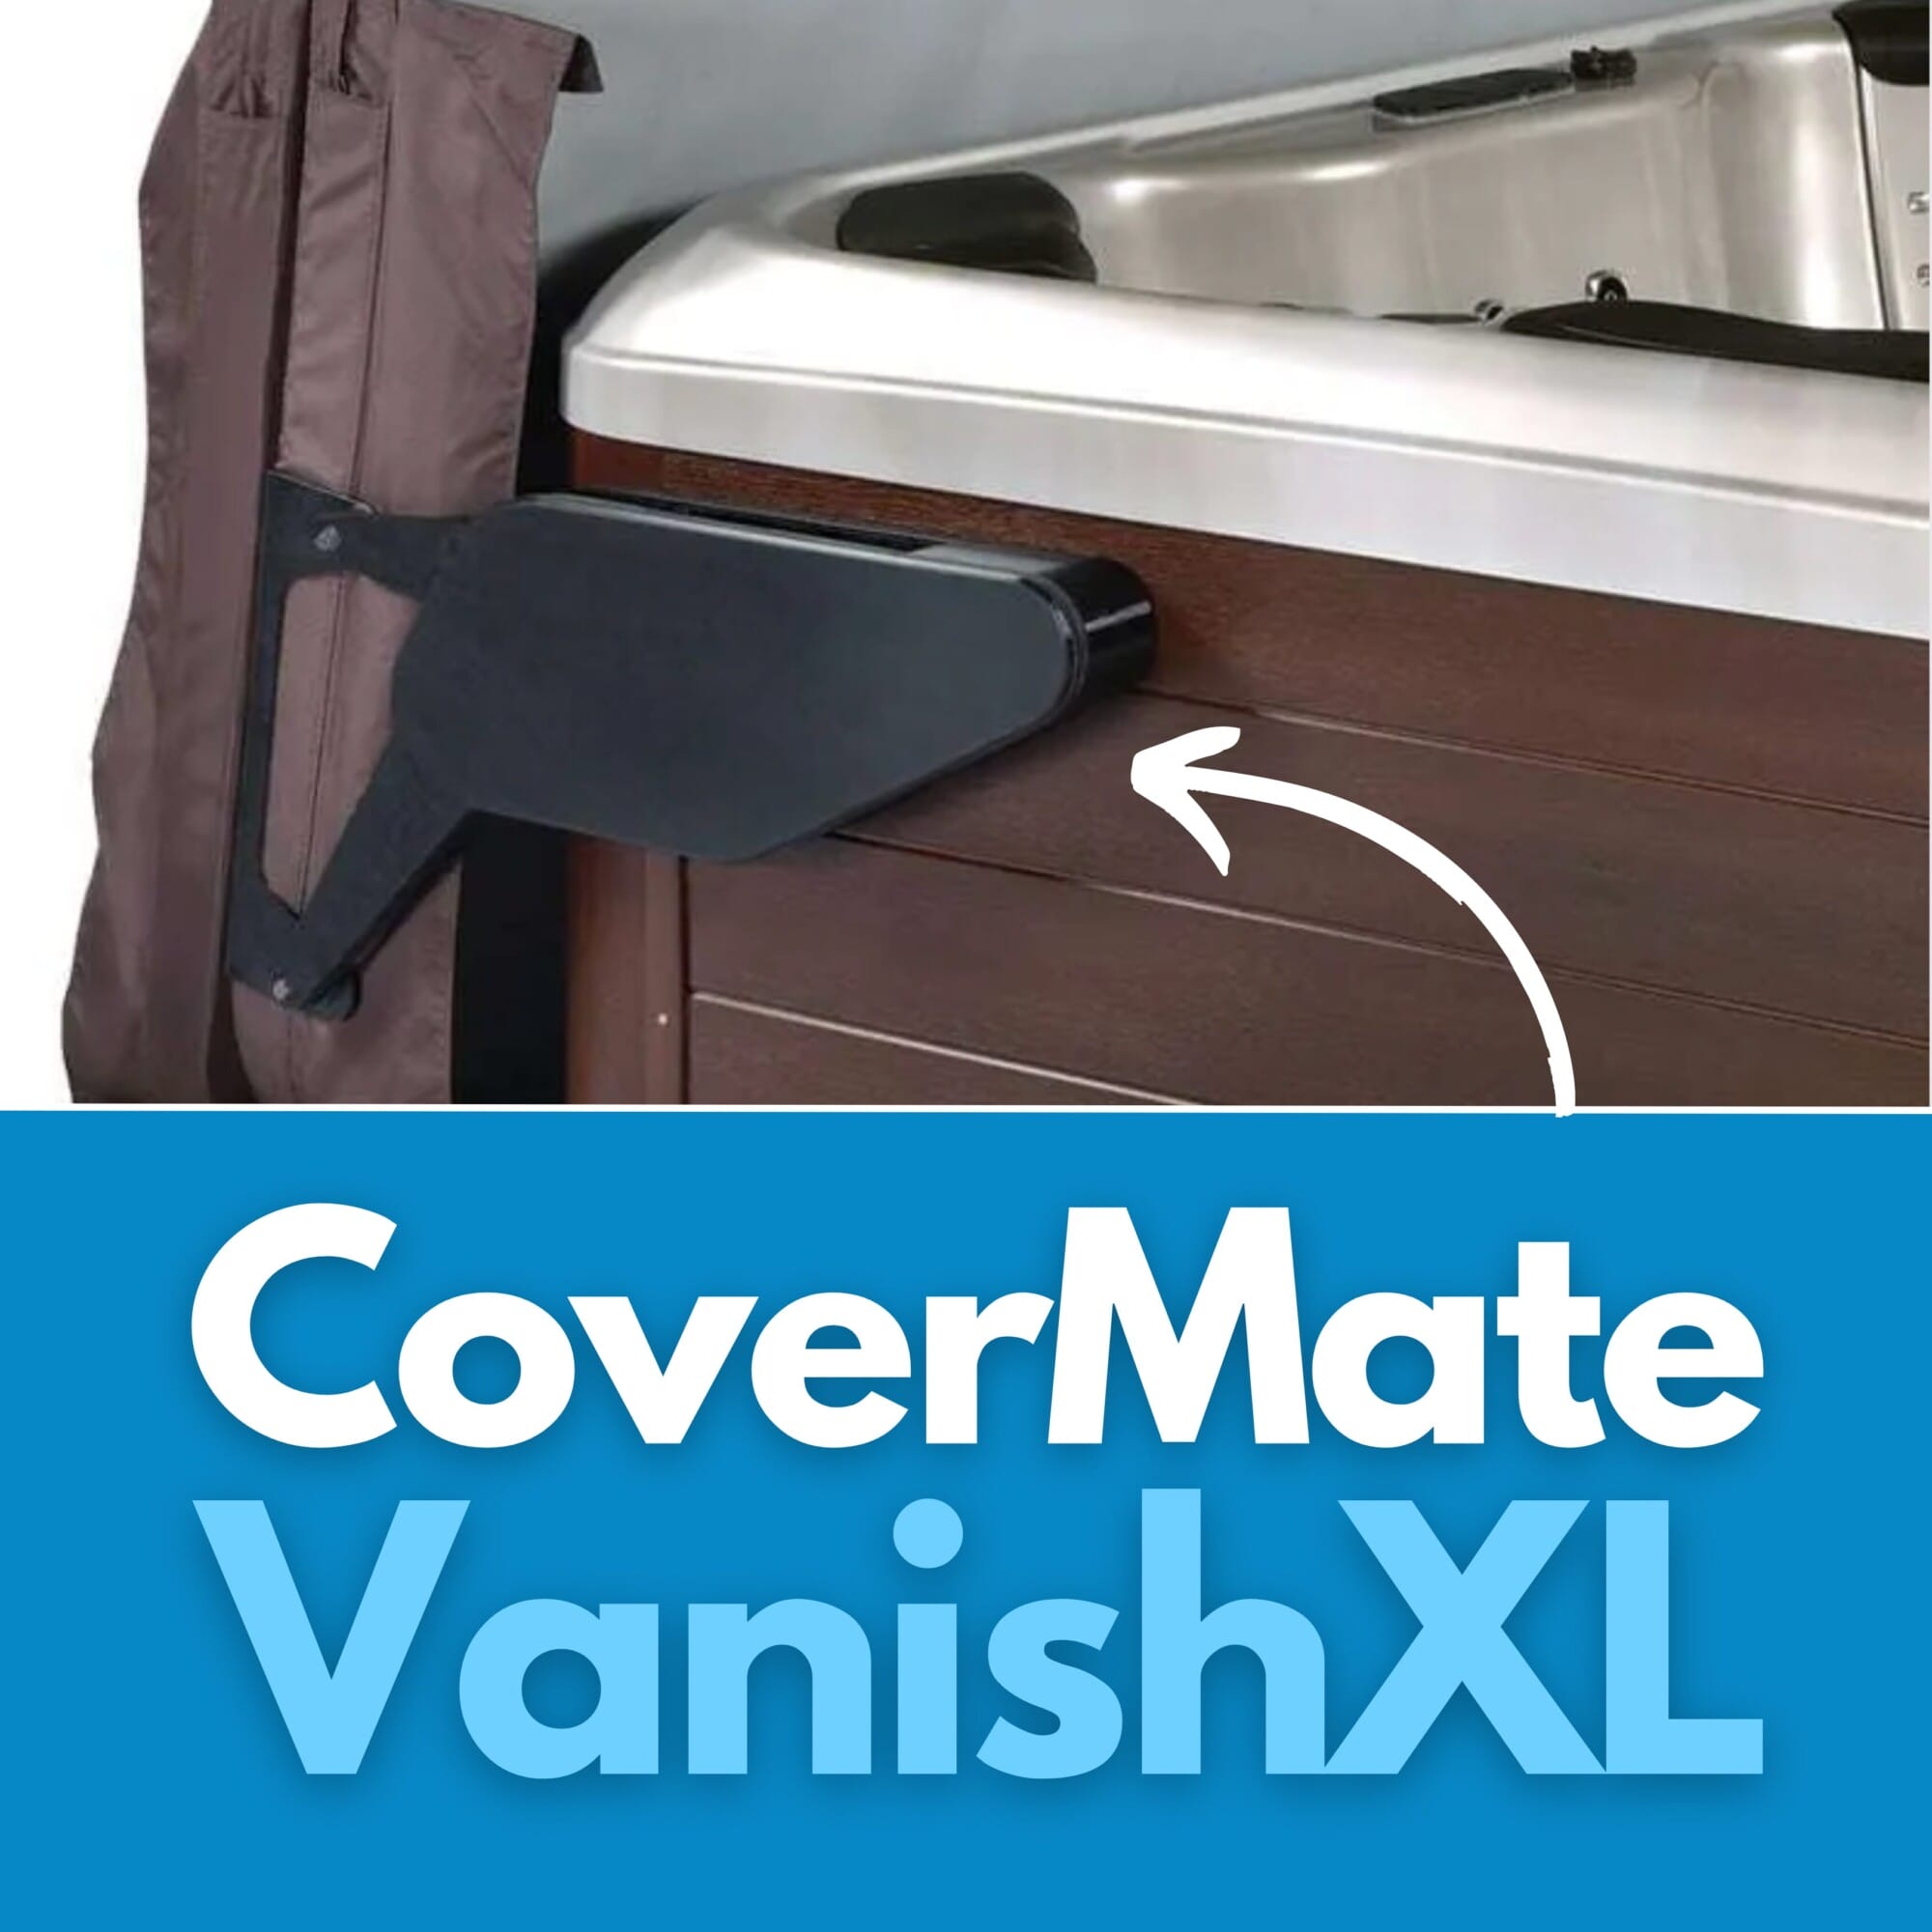 CoverMate Vanish XL cover lifter